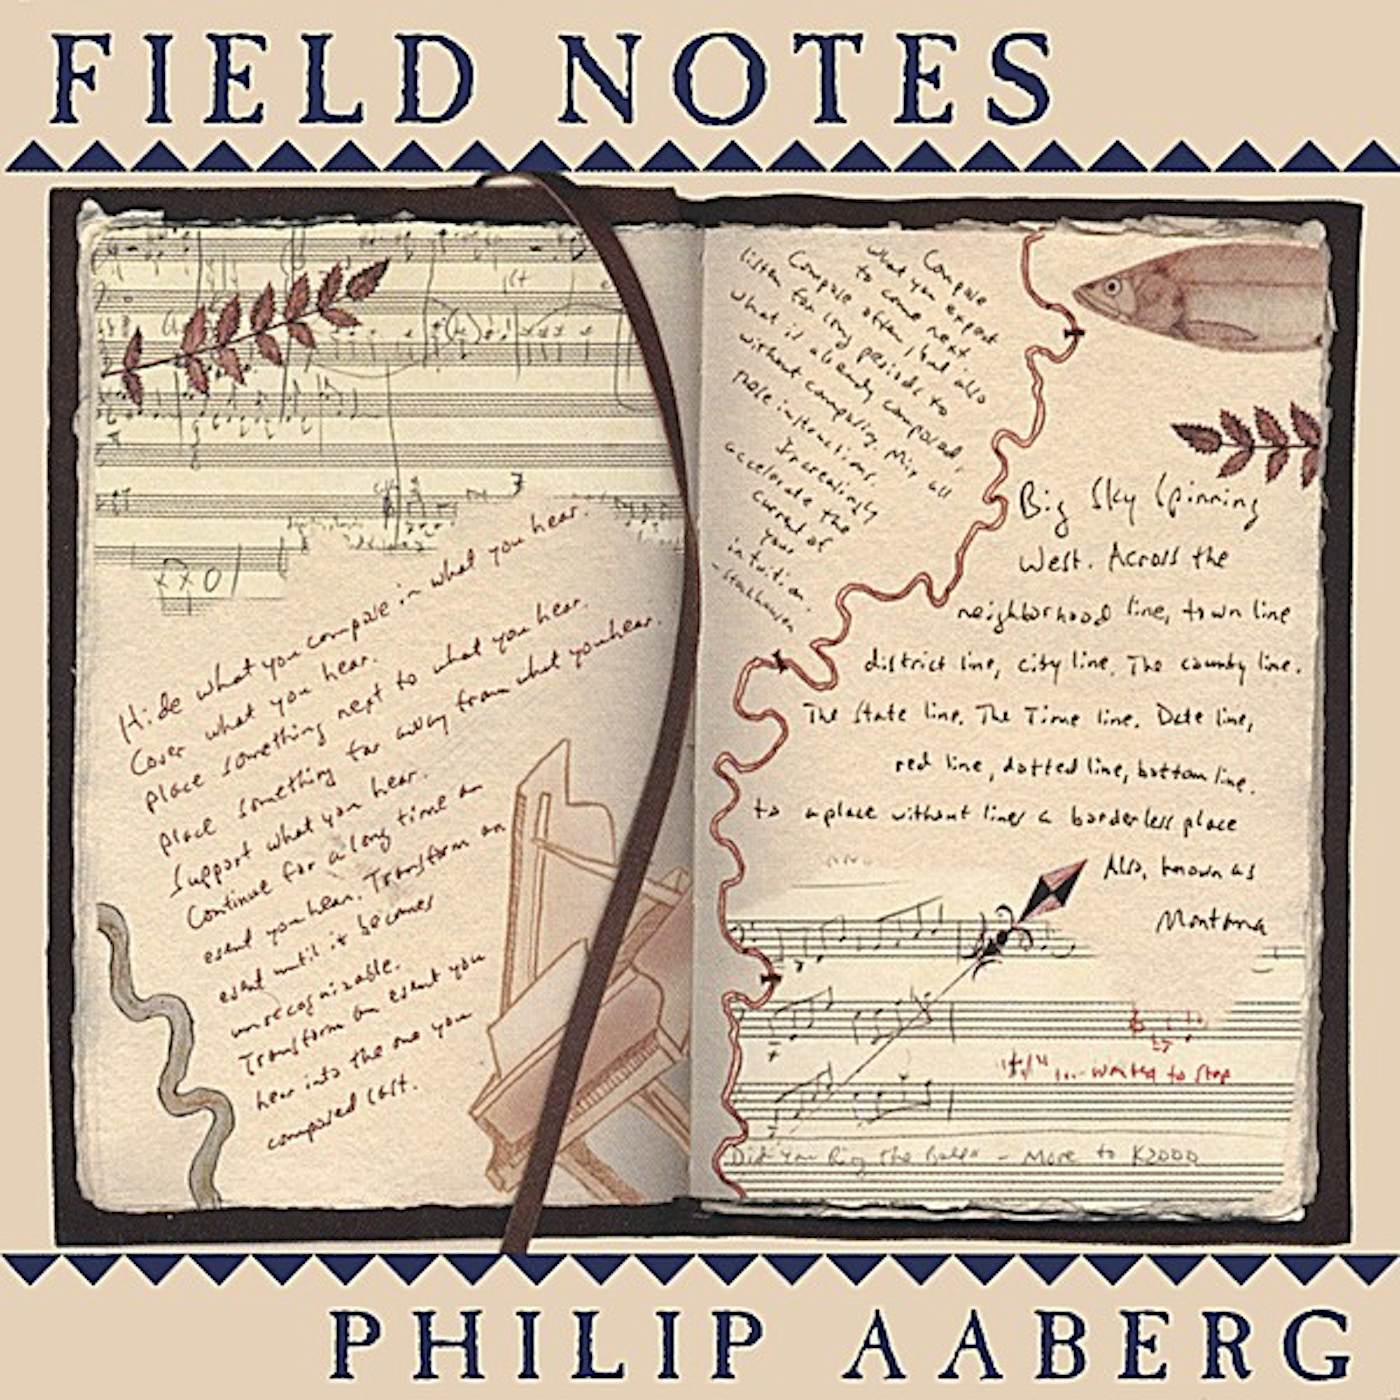 Philip Aaberg FIELD NOTES CD